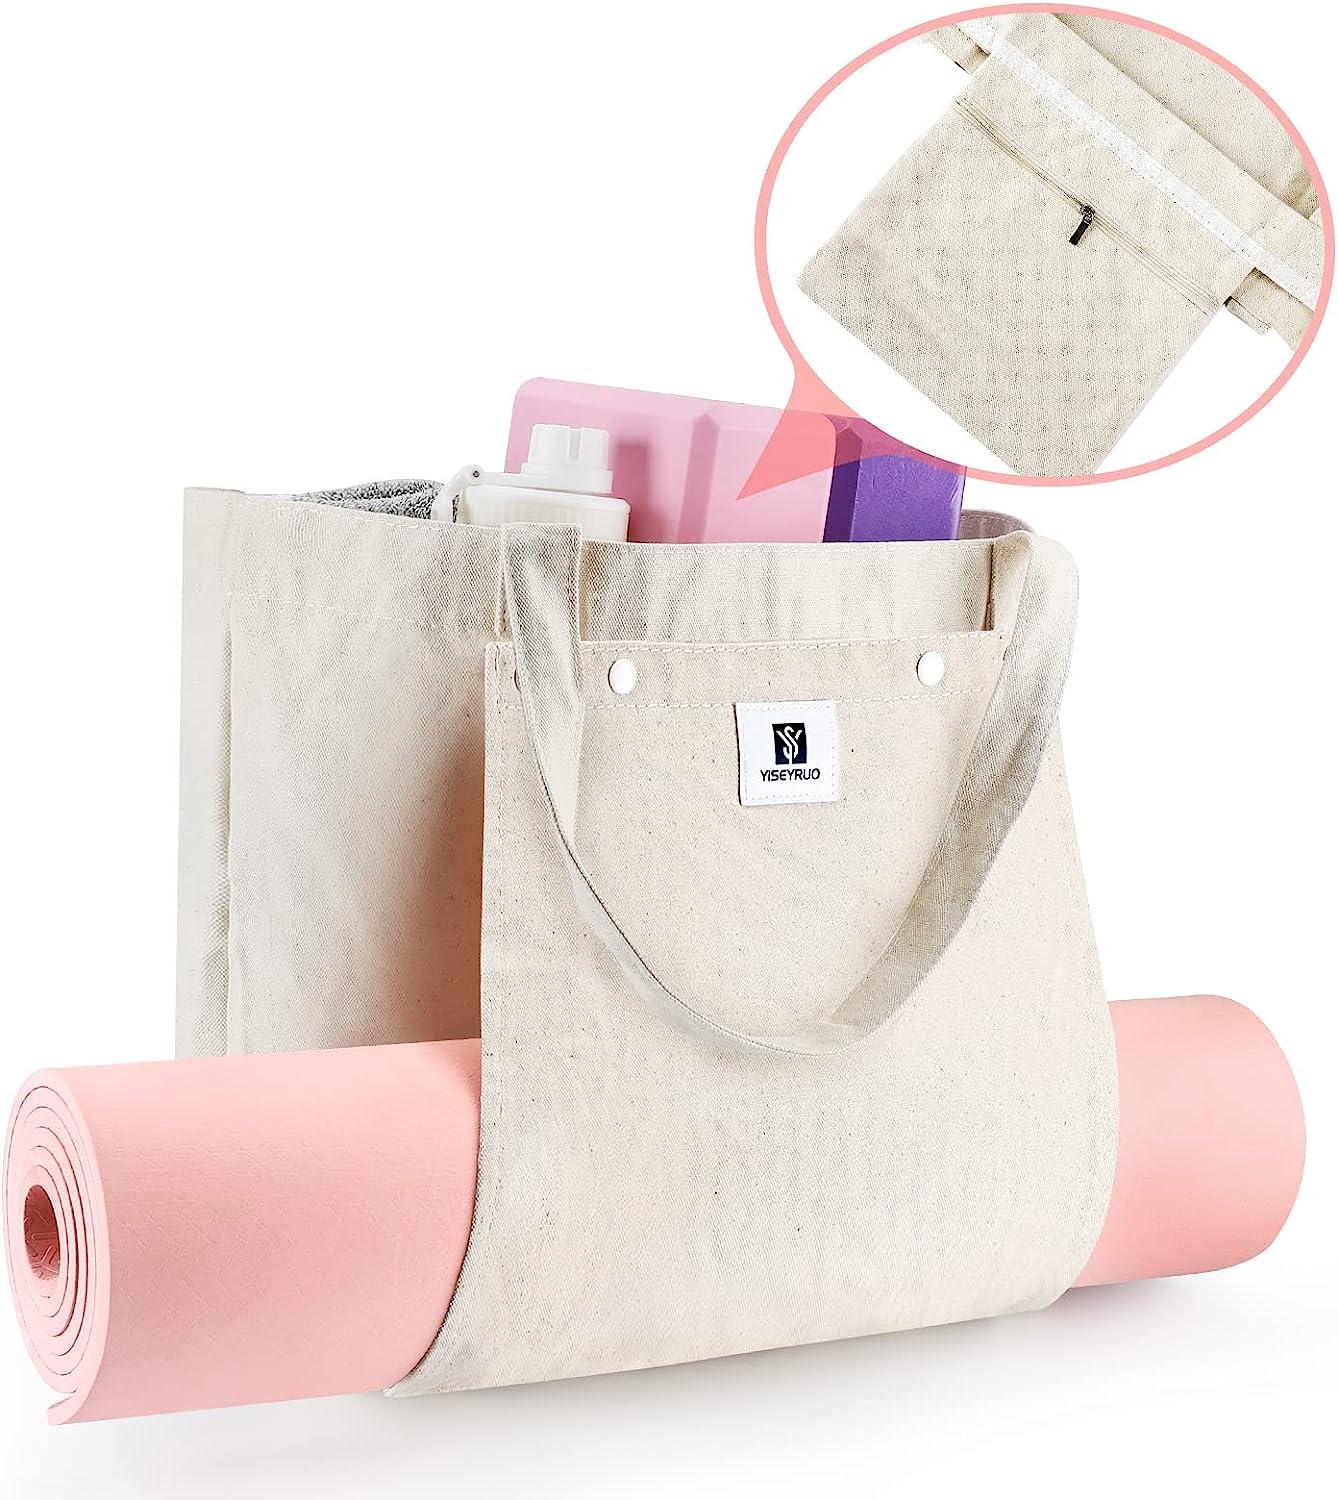 Moyaqi Canvas Tote Bag with Yoga Mat Carrier Pocket Carryall